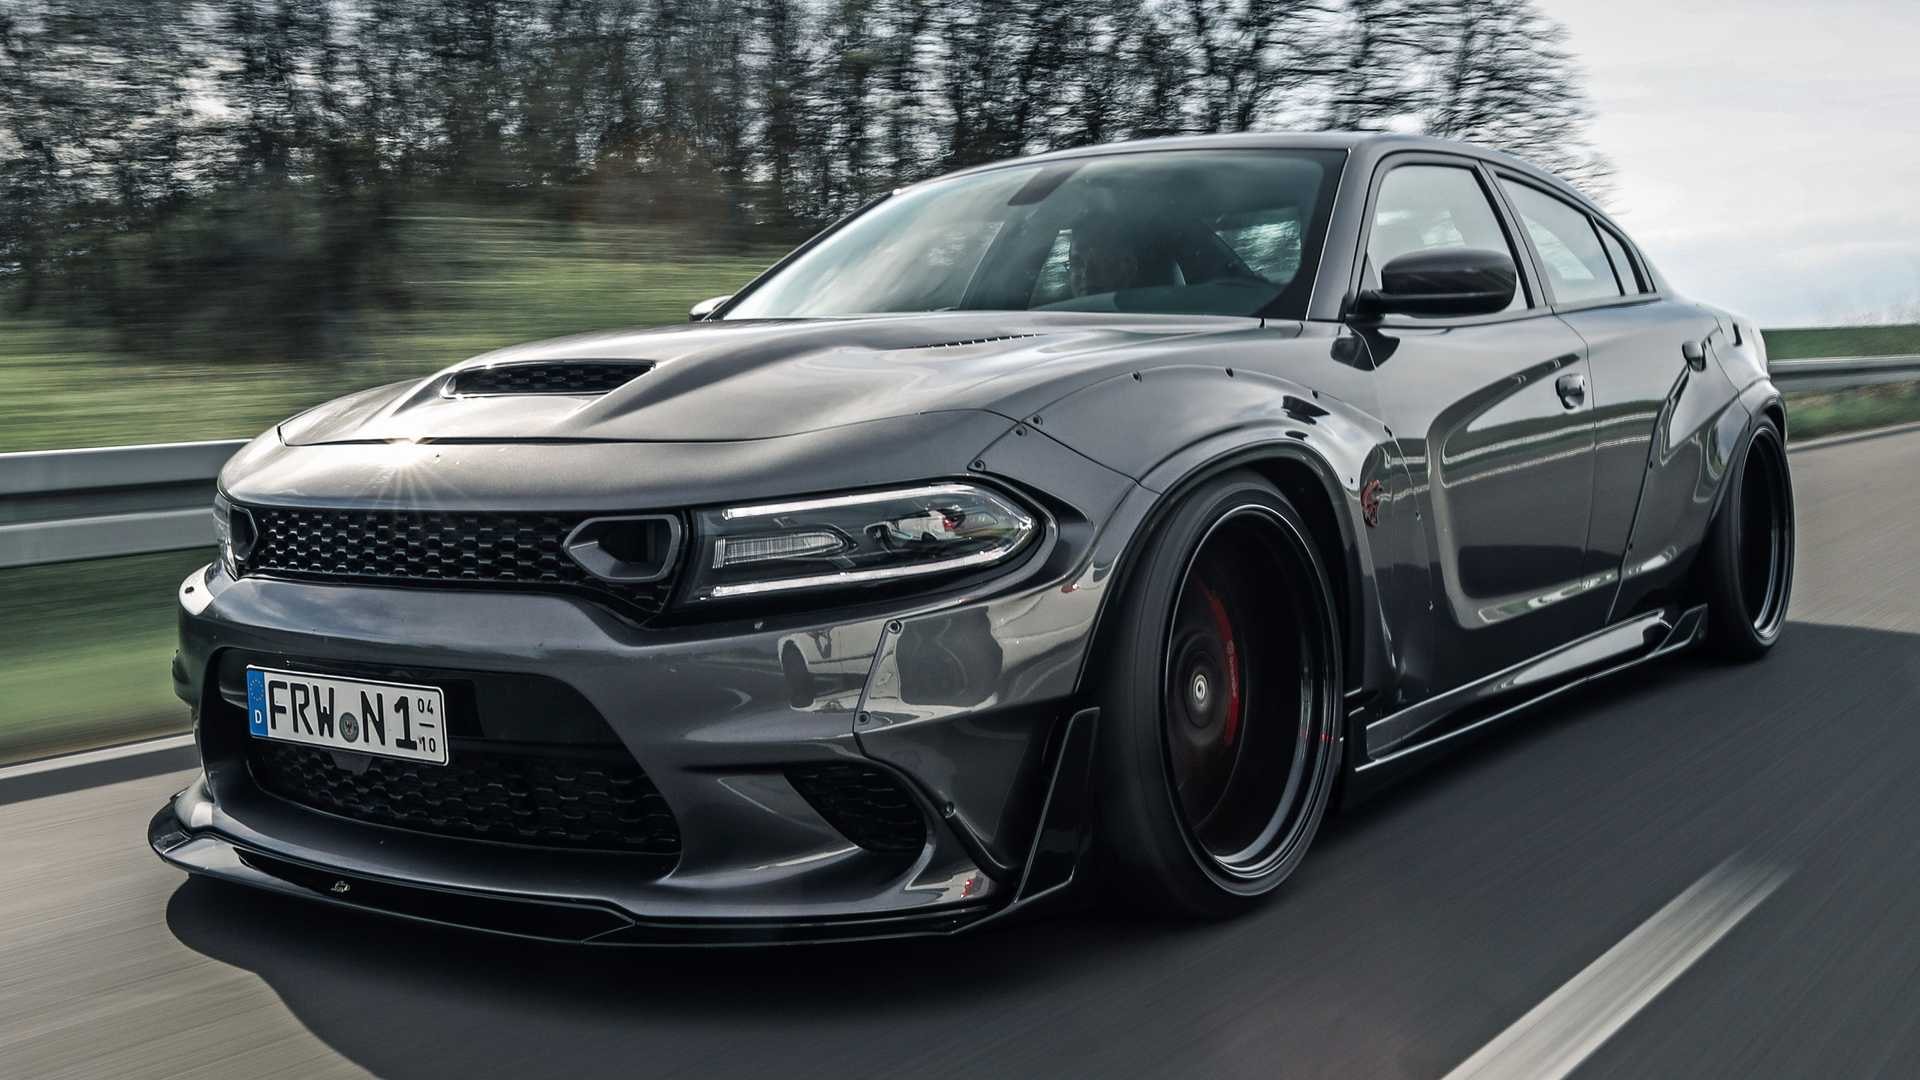 German Company Develops Aggressive Widebody Kit For Dodge Charger! -  MoparInsiders